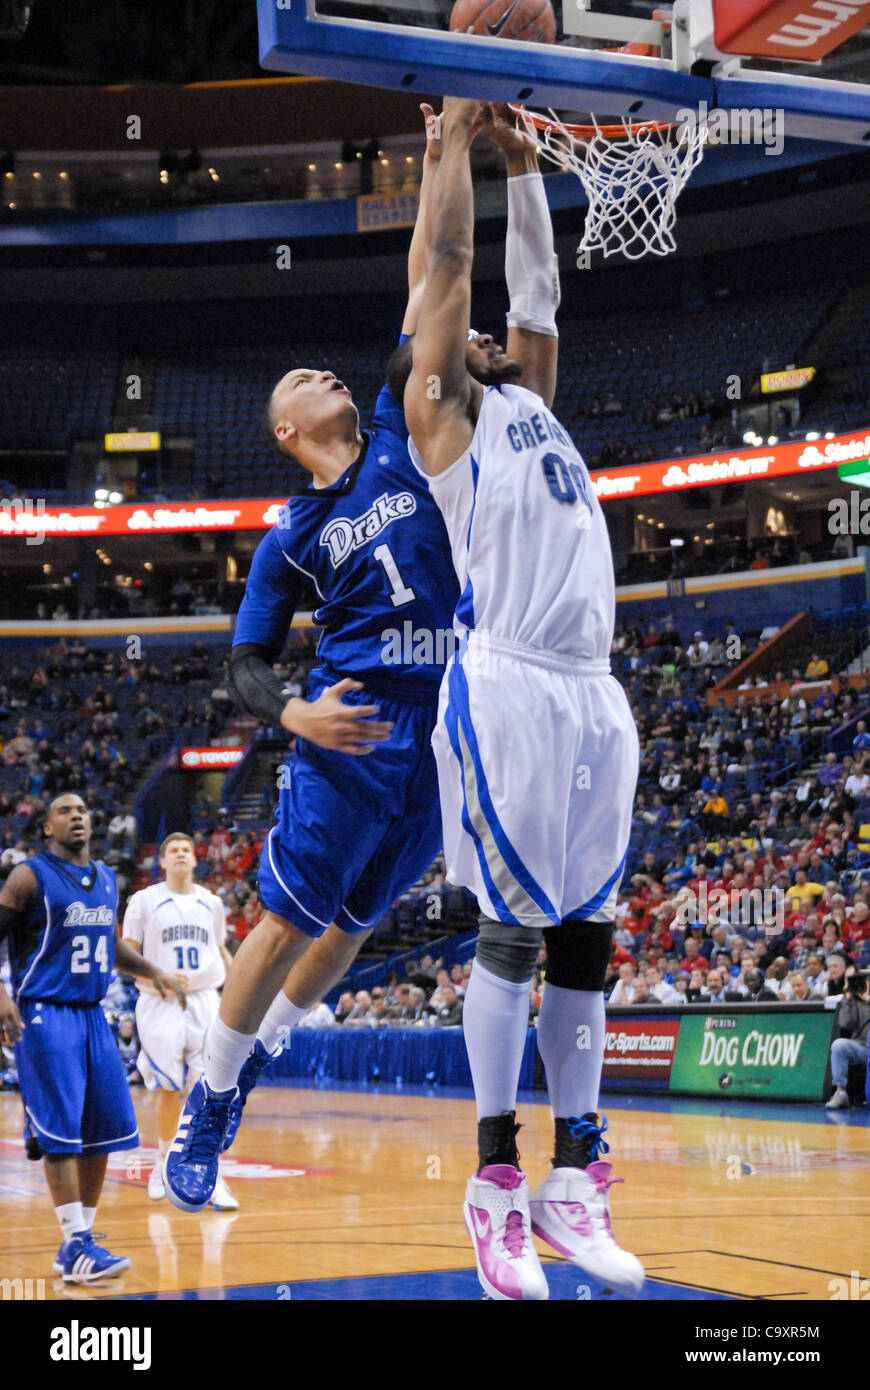 March 2, 2012 - St. Louis, Missouri, United States of America - Creighton's Gregory Echeniquie (00) misses a slam while being defended by Drake's Jordan Clarke (1) during the second round of the State Farm Missouri Valley Conference Men's Basketball Tournament at Scottrade Center, St. Louis, MO. (Cr Stock Photo